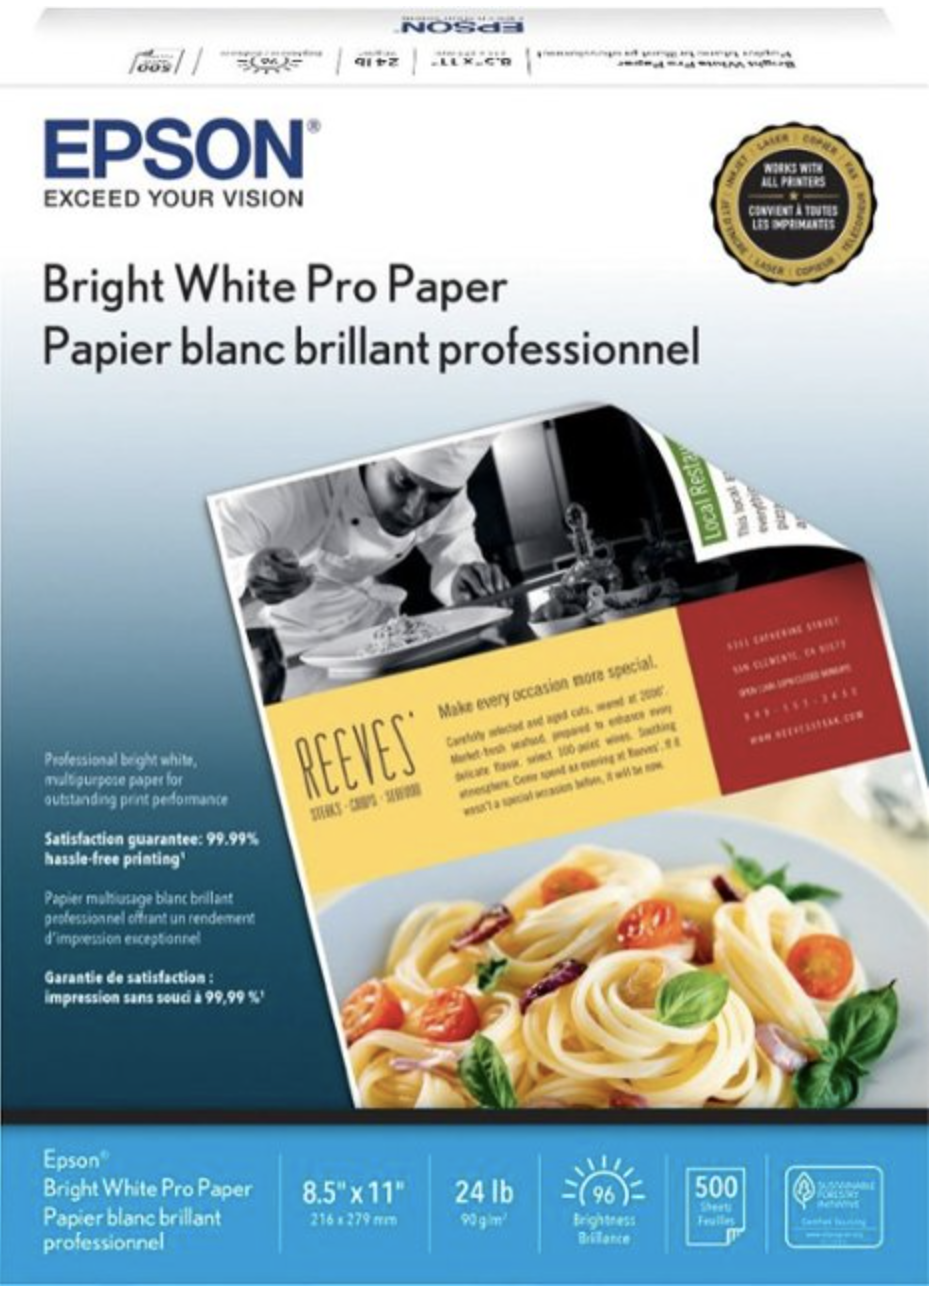 Cheap Printer Paper, Top Quality. On Sale Now.